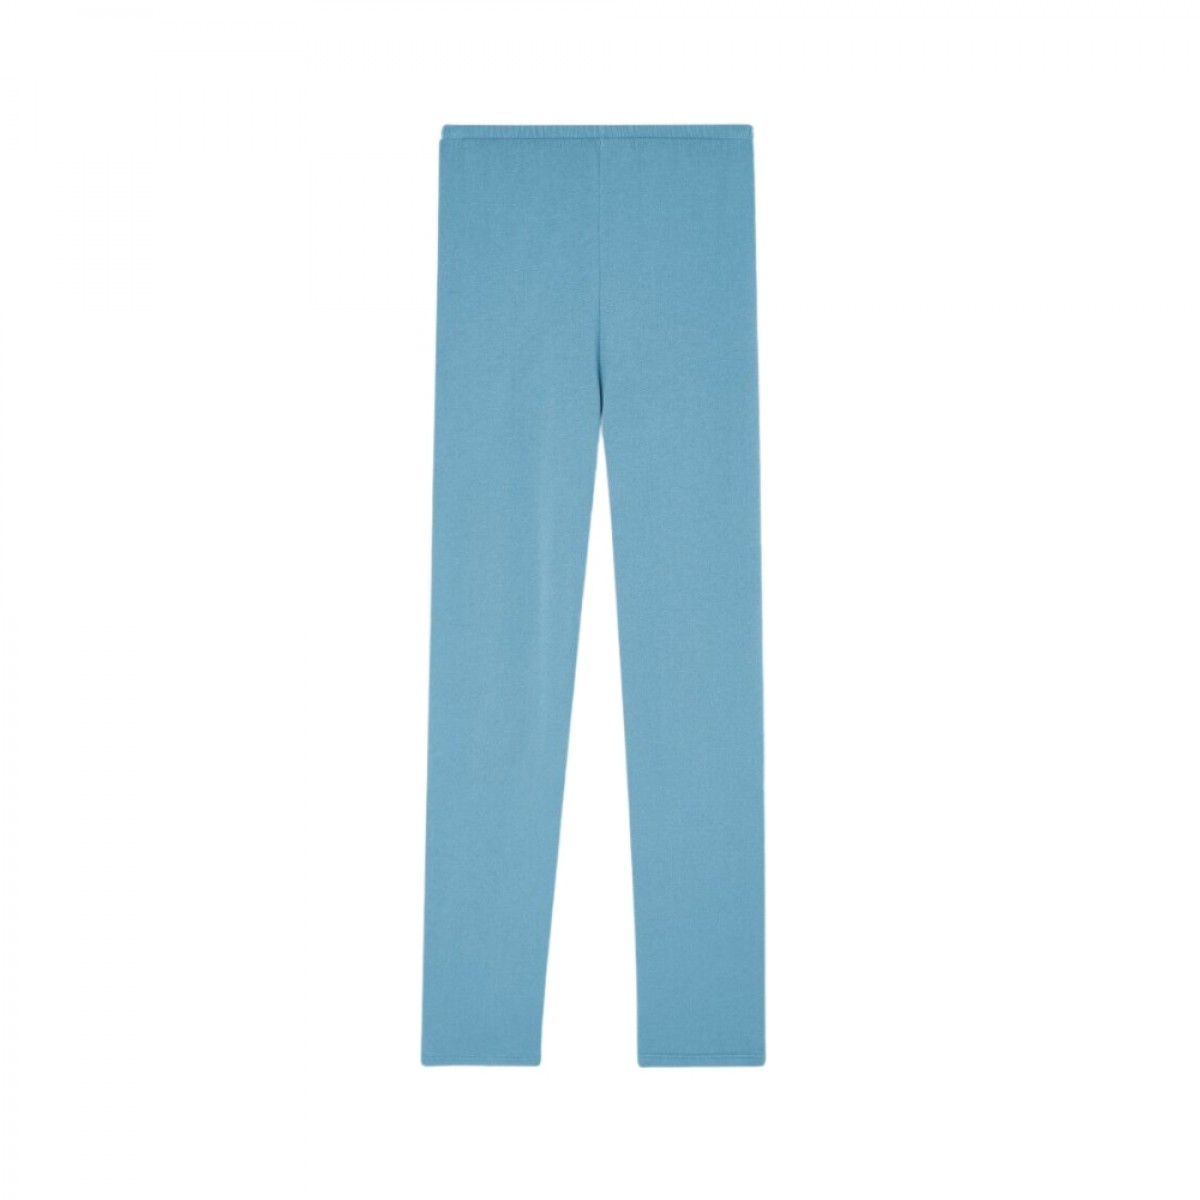 hapylife joggers - vintage waterfall - front